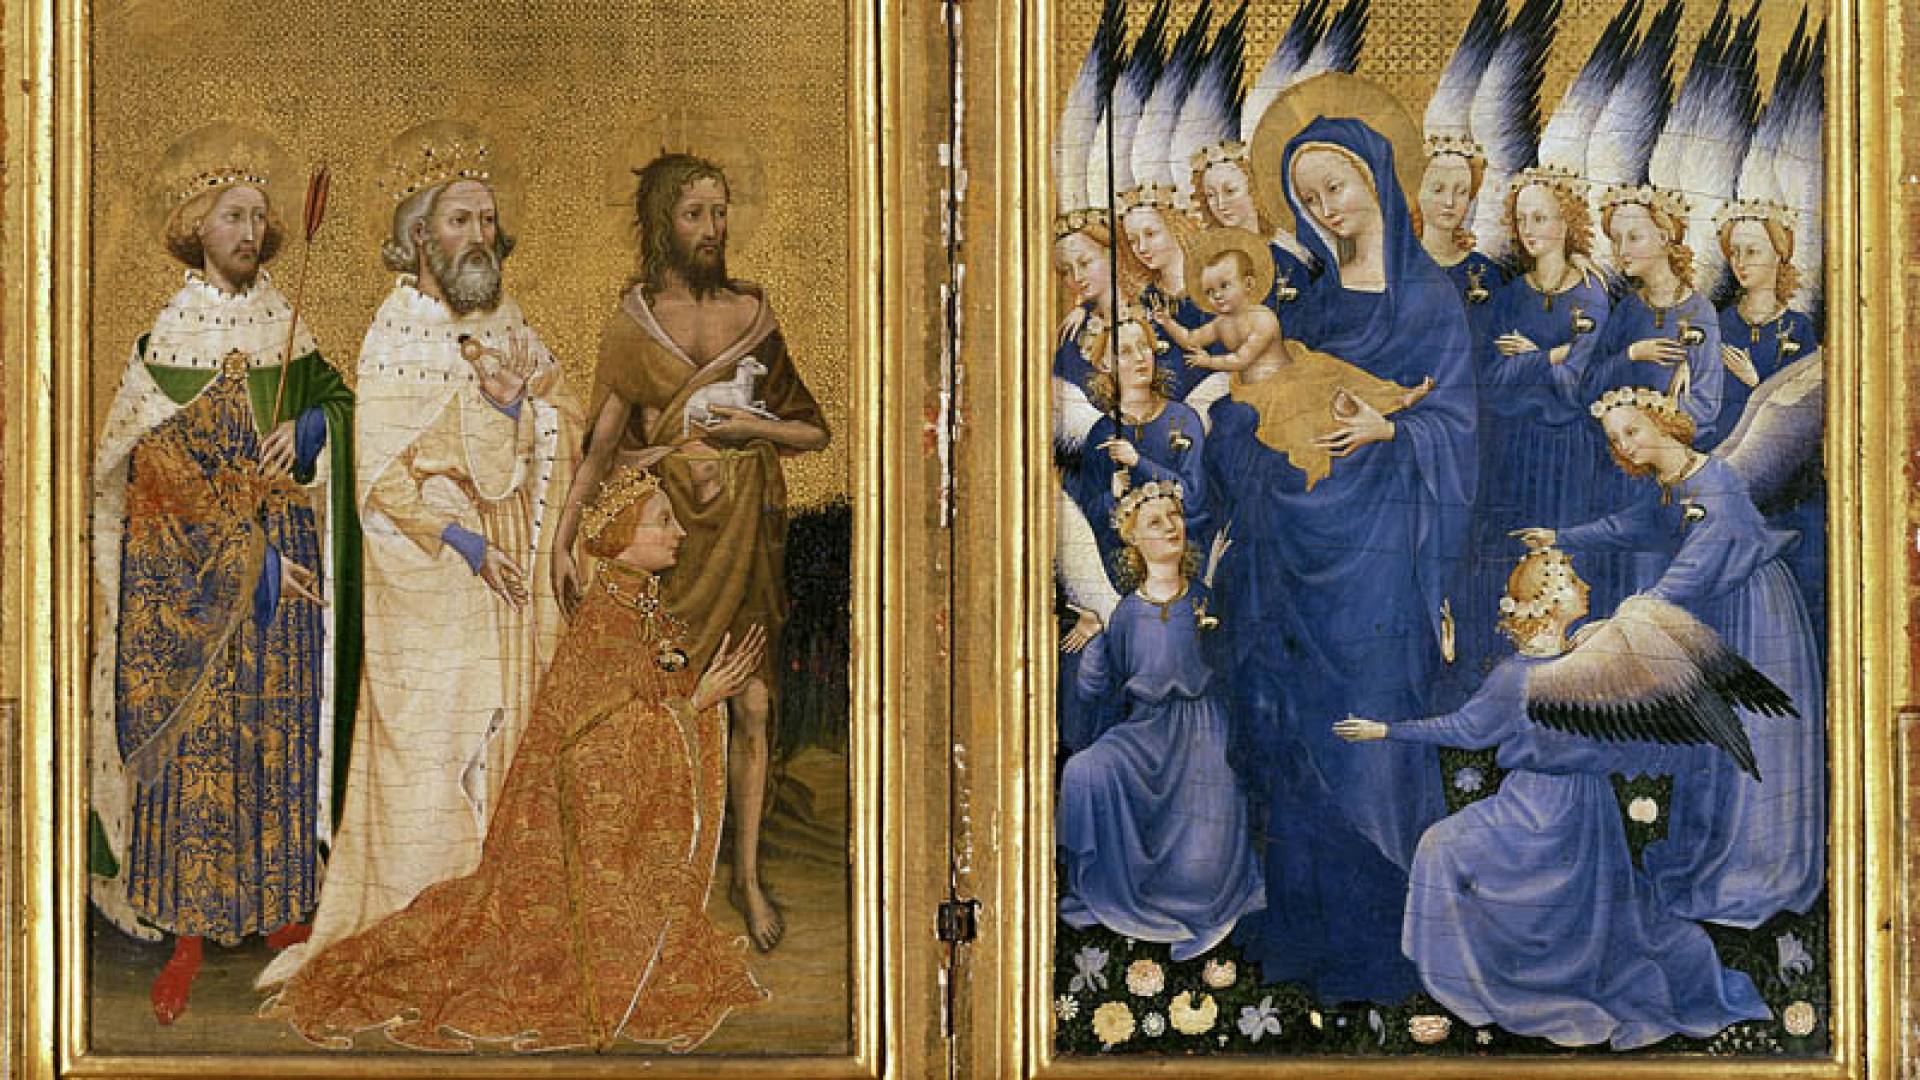 NATIONAL GALLERY, Wilton Diptych